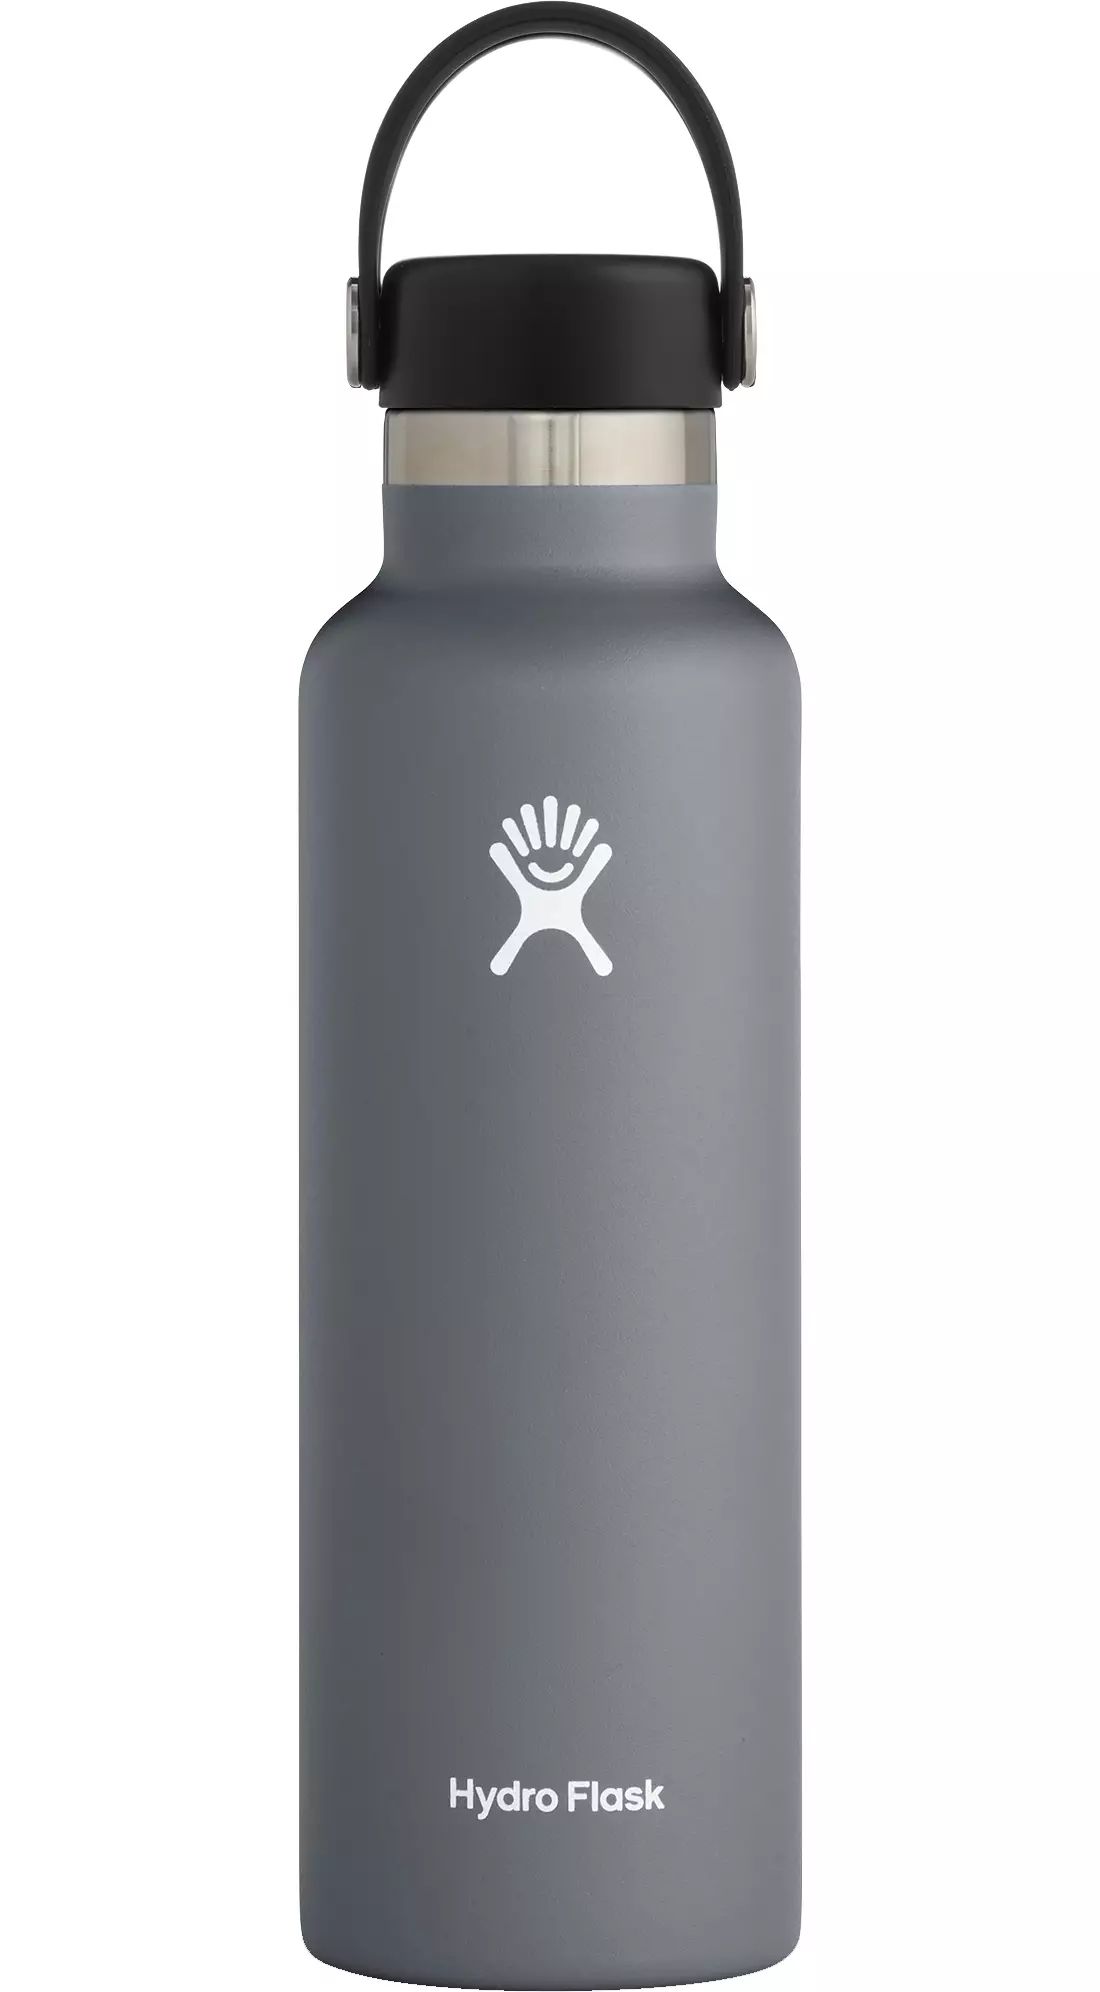 Hydro Flask Standard Mouth 21 oz. Bottle with Flex Cap | Dick's Sporting Goods